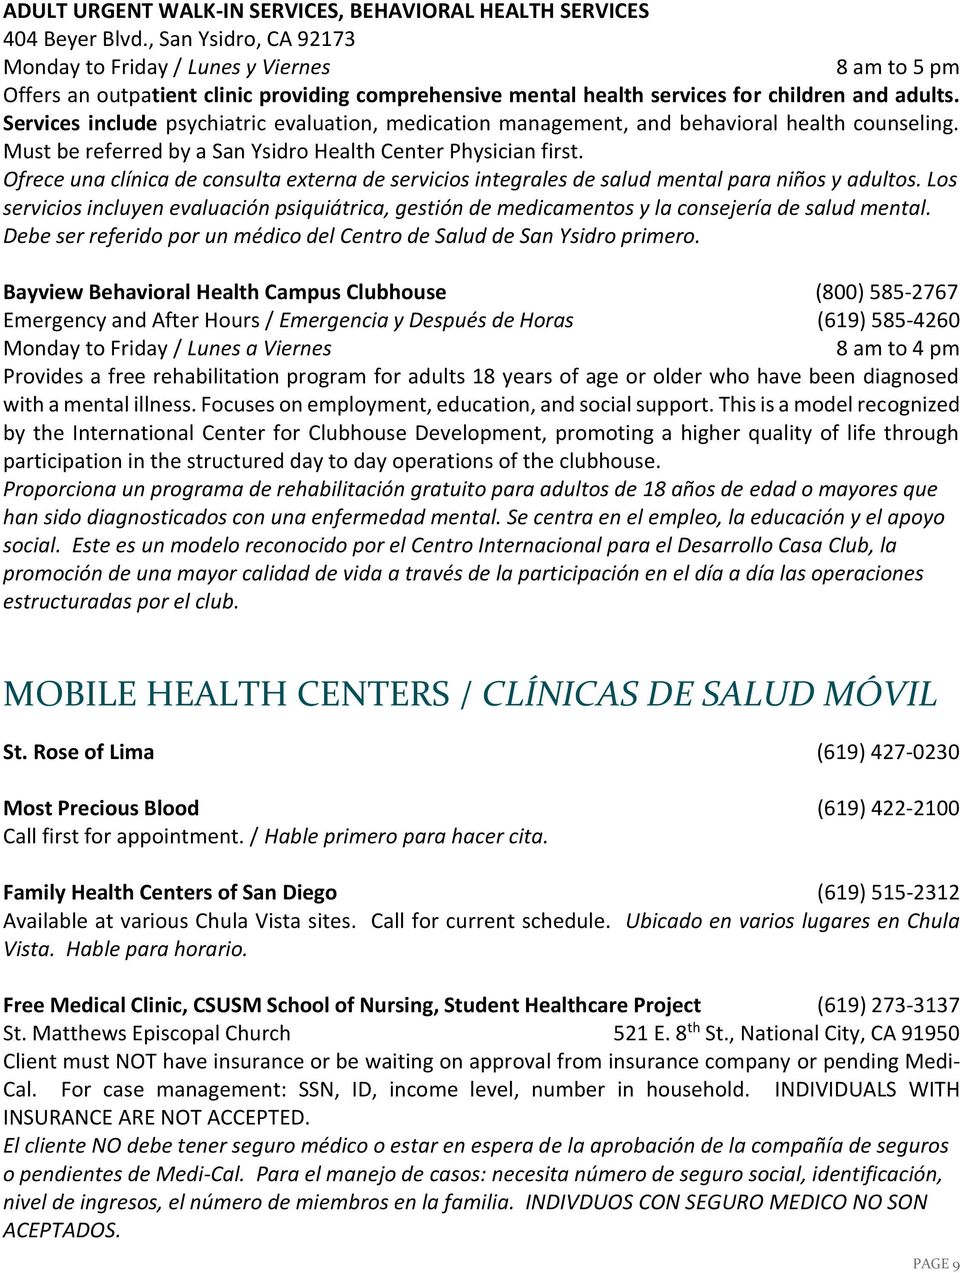 Services include psychiatric evaluation, medication management, and behavioral health counseling. Must be referred by a San Ysidro Health Center Physician first.